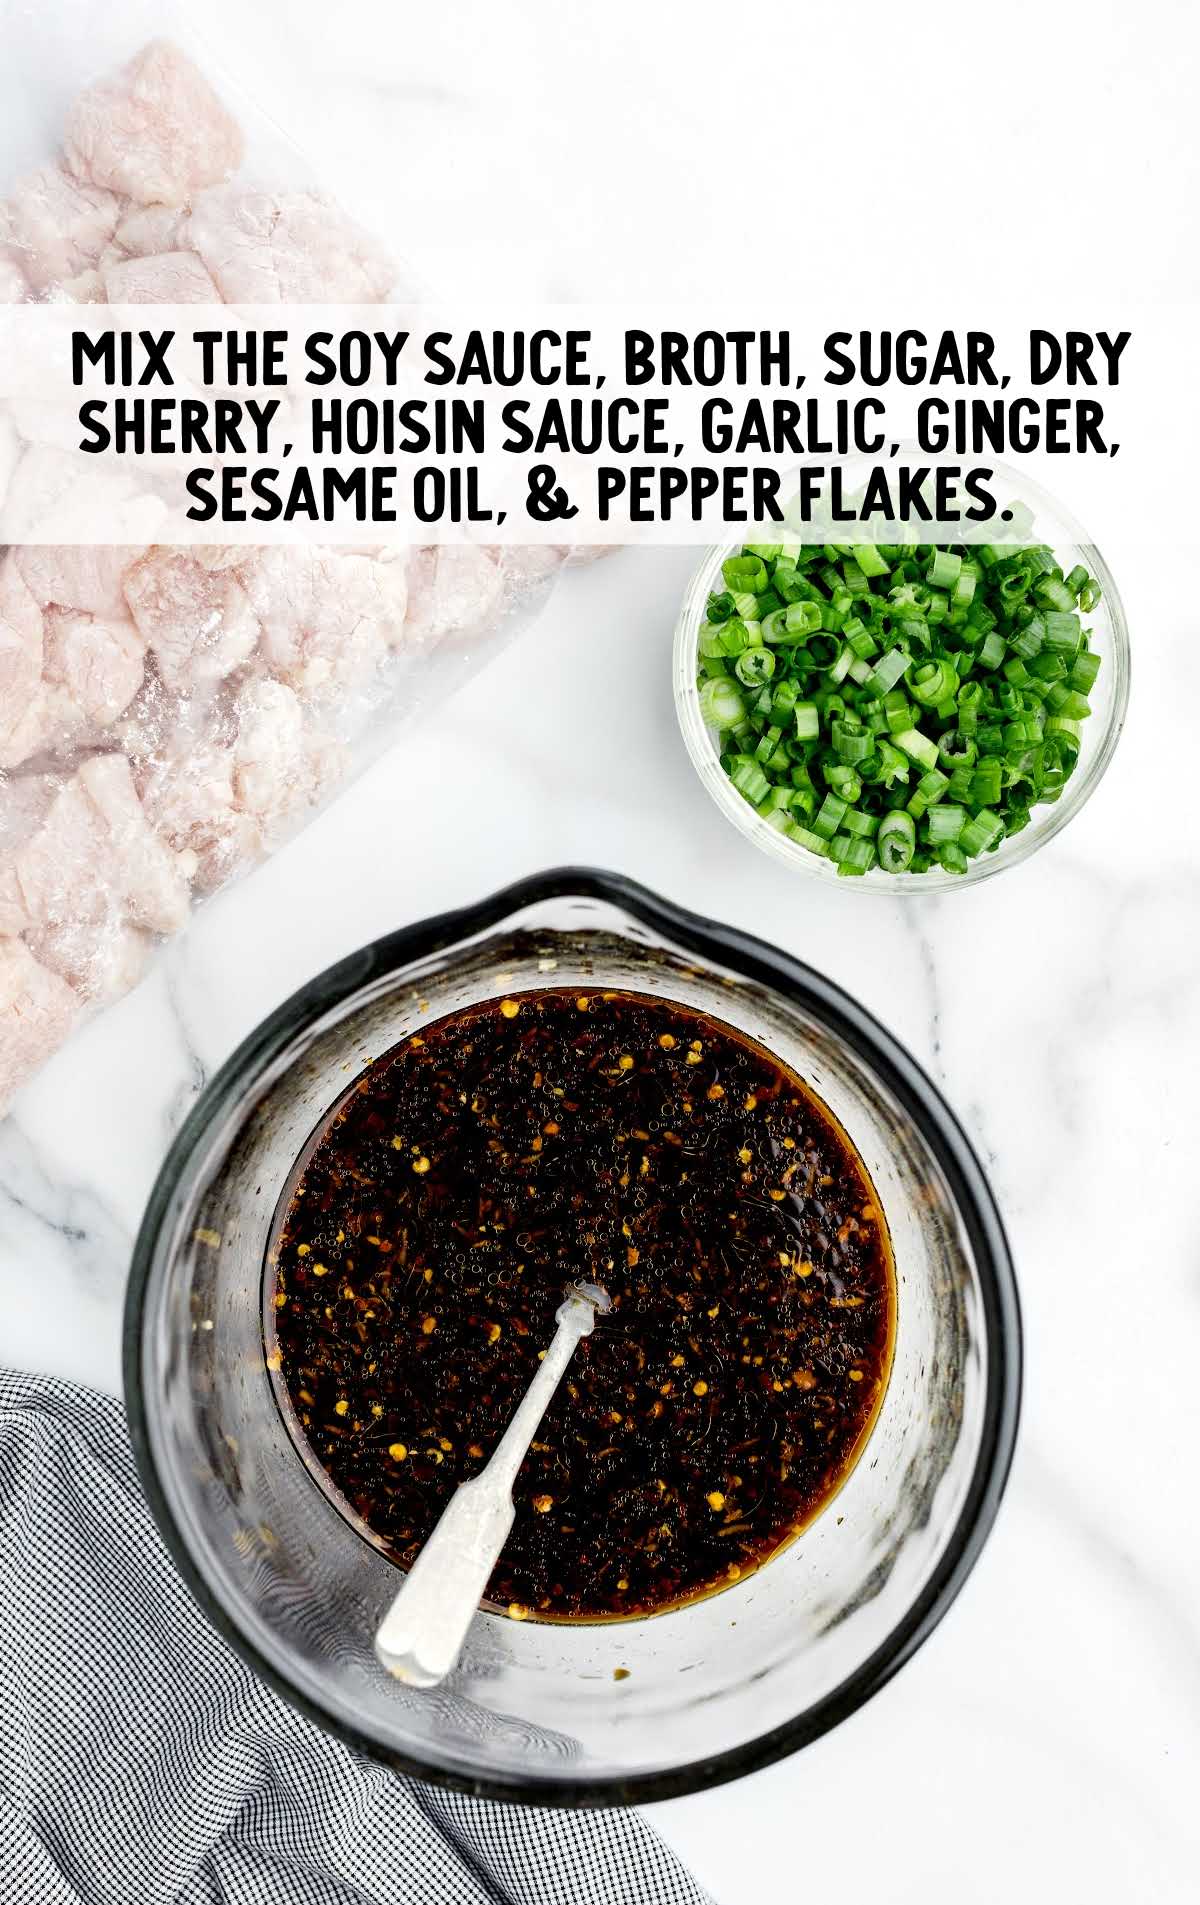 soy sauce, broth, sugar, dry sherry, hoisin sauce, garlic, ginger, sesame oil, and pepper flakes mixed together